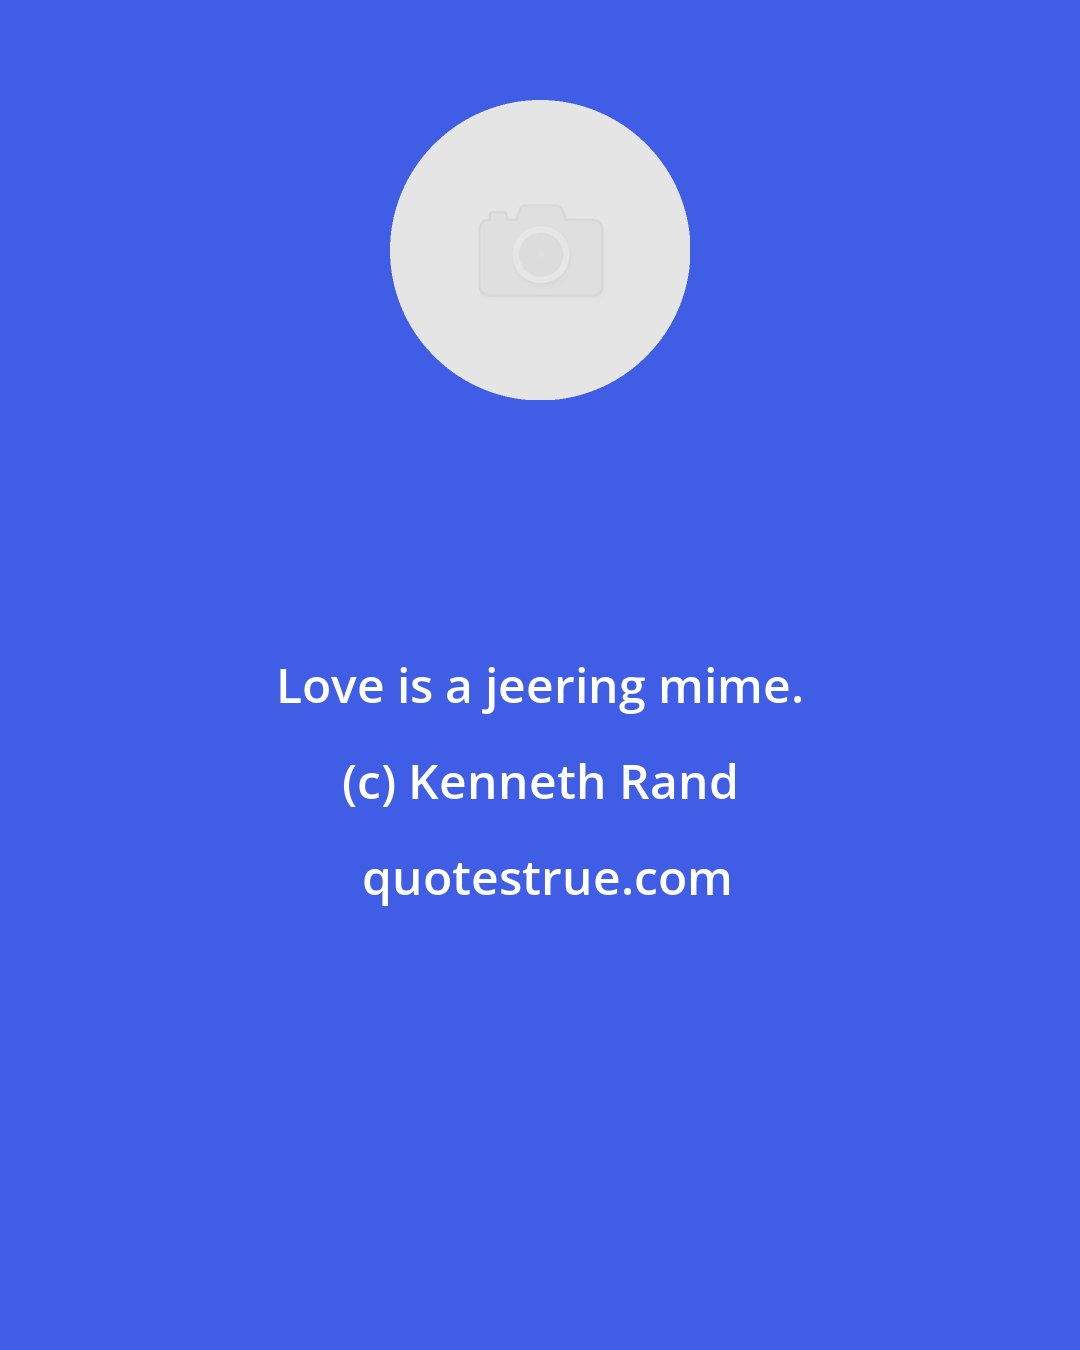 Kenneth Rand: Love is a jeering mime.